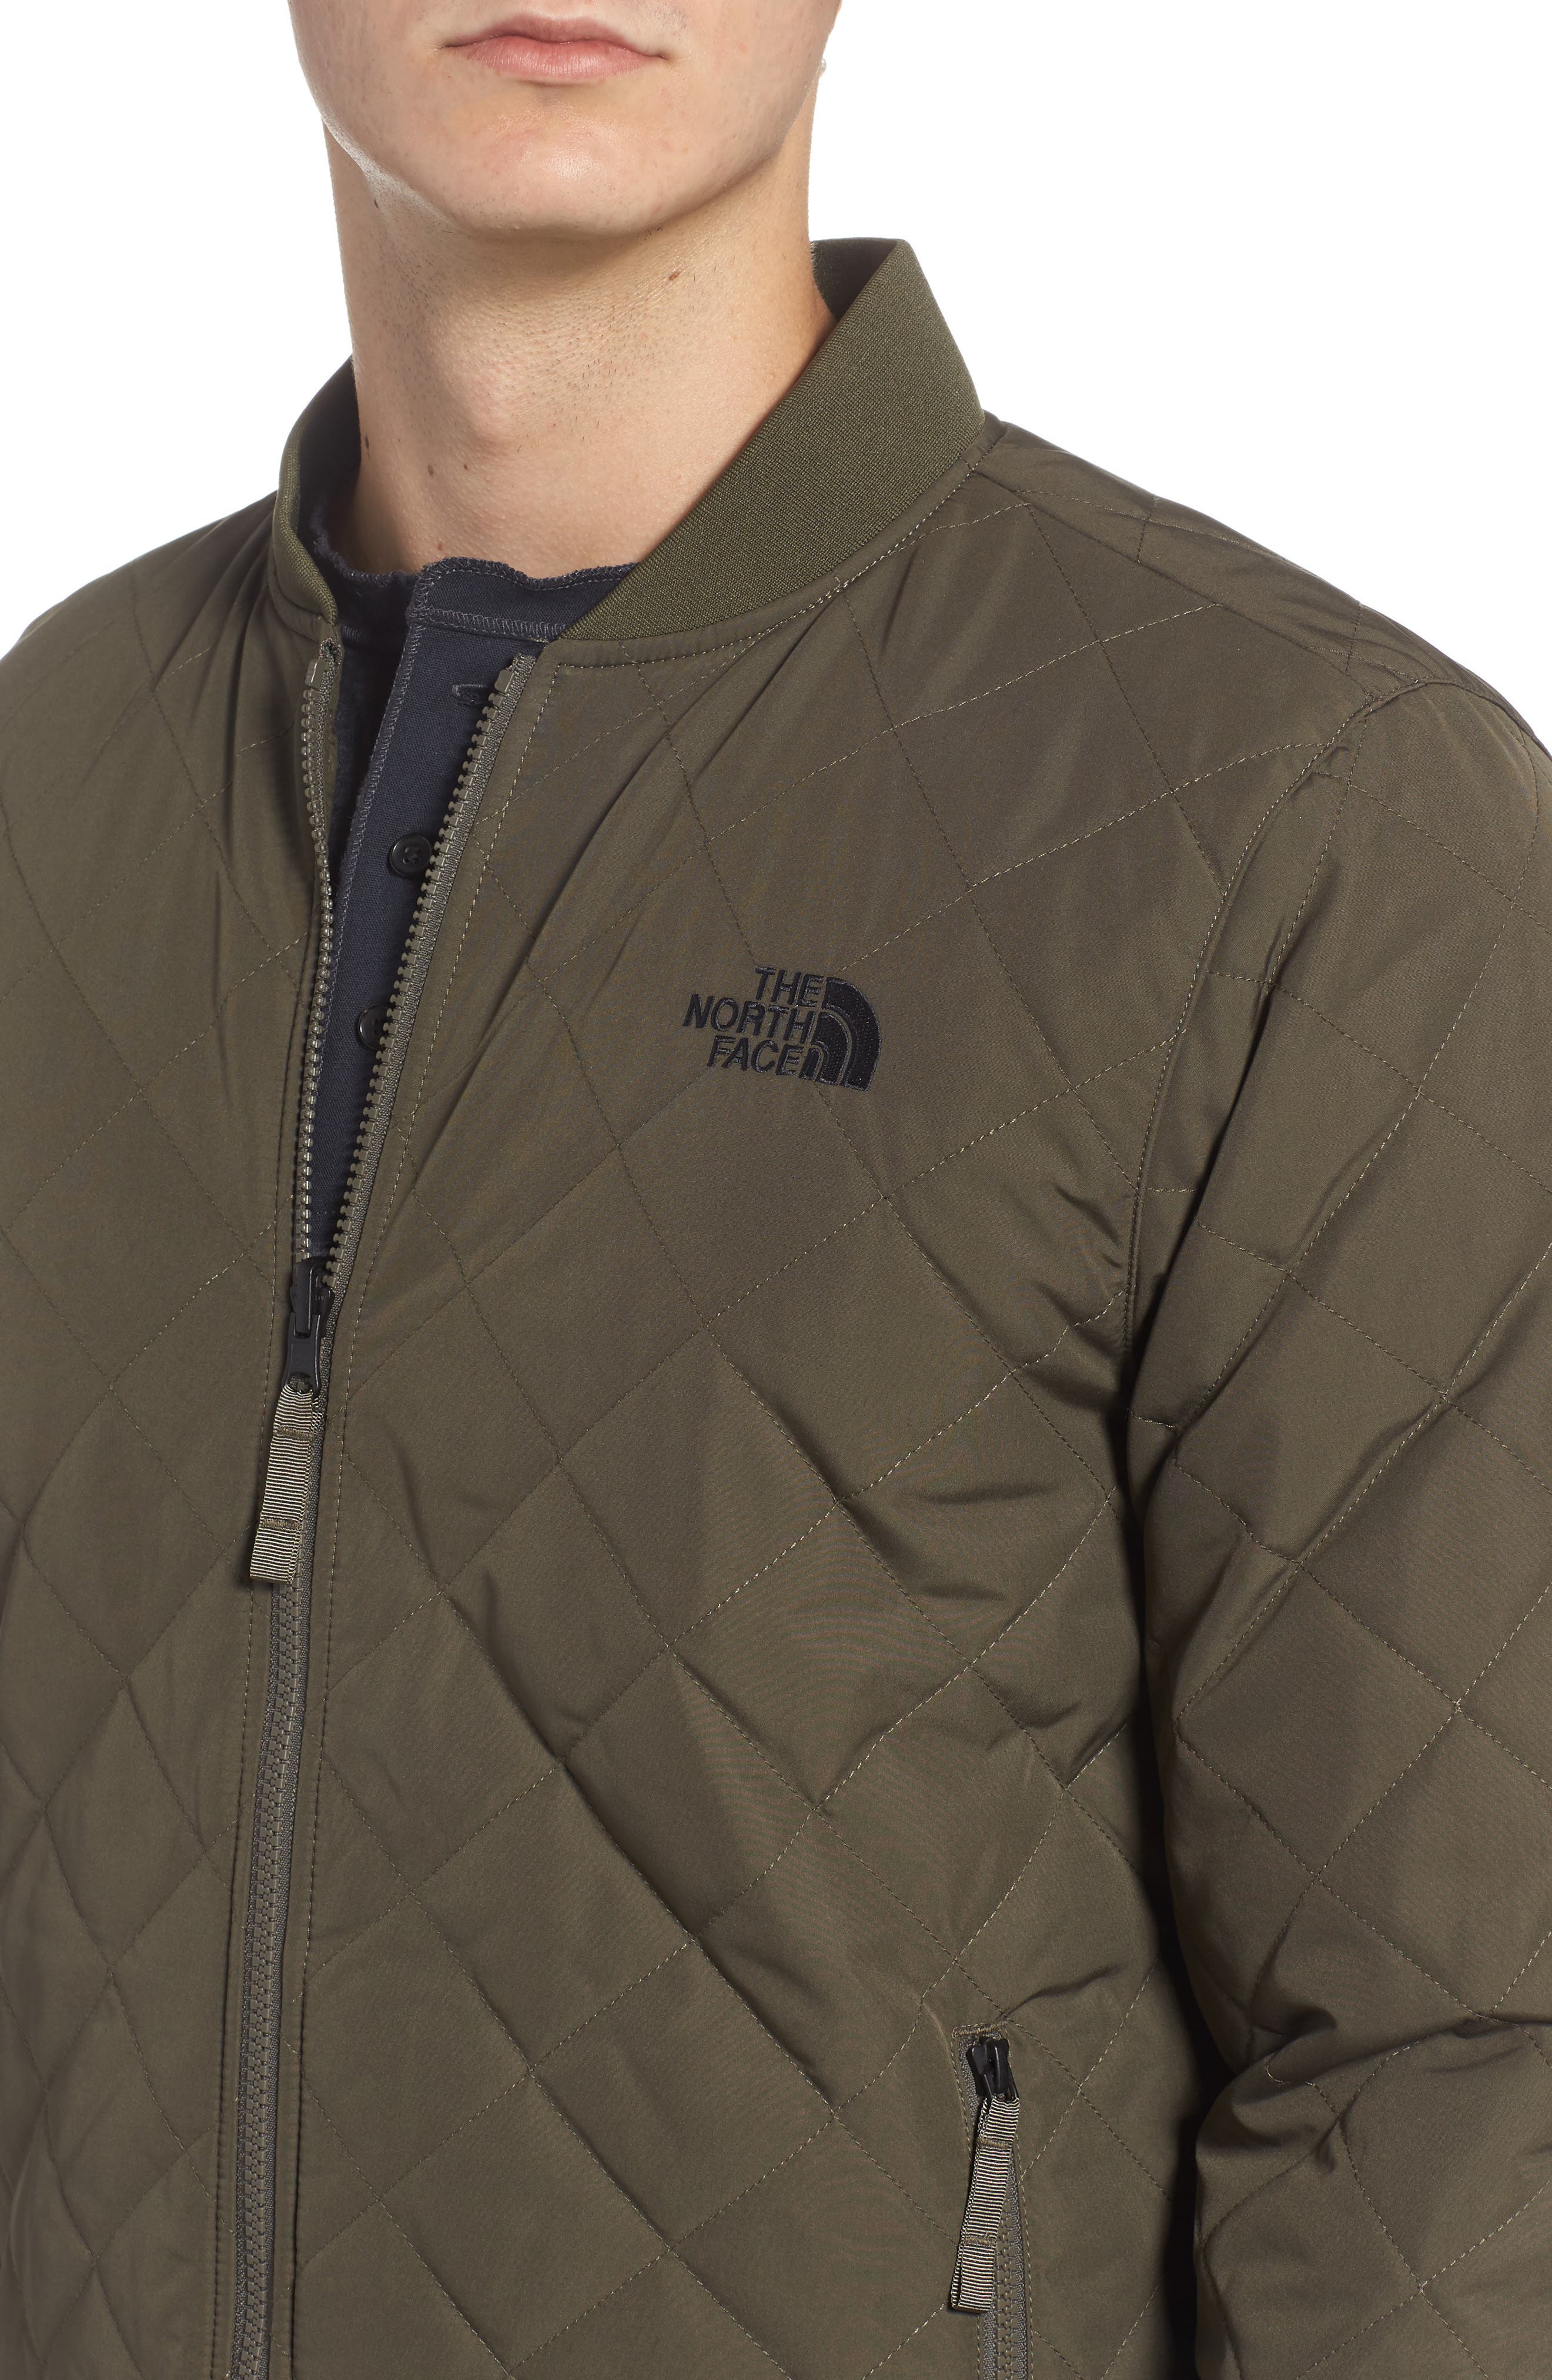 north face jester bomber